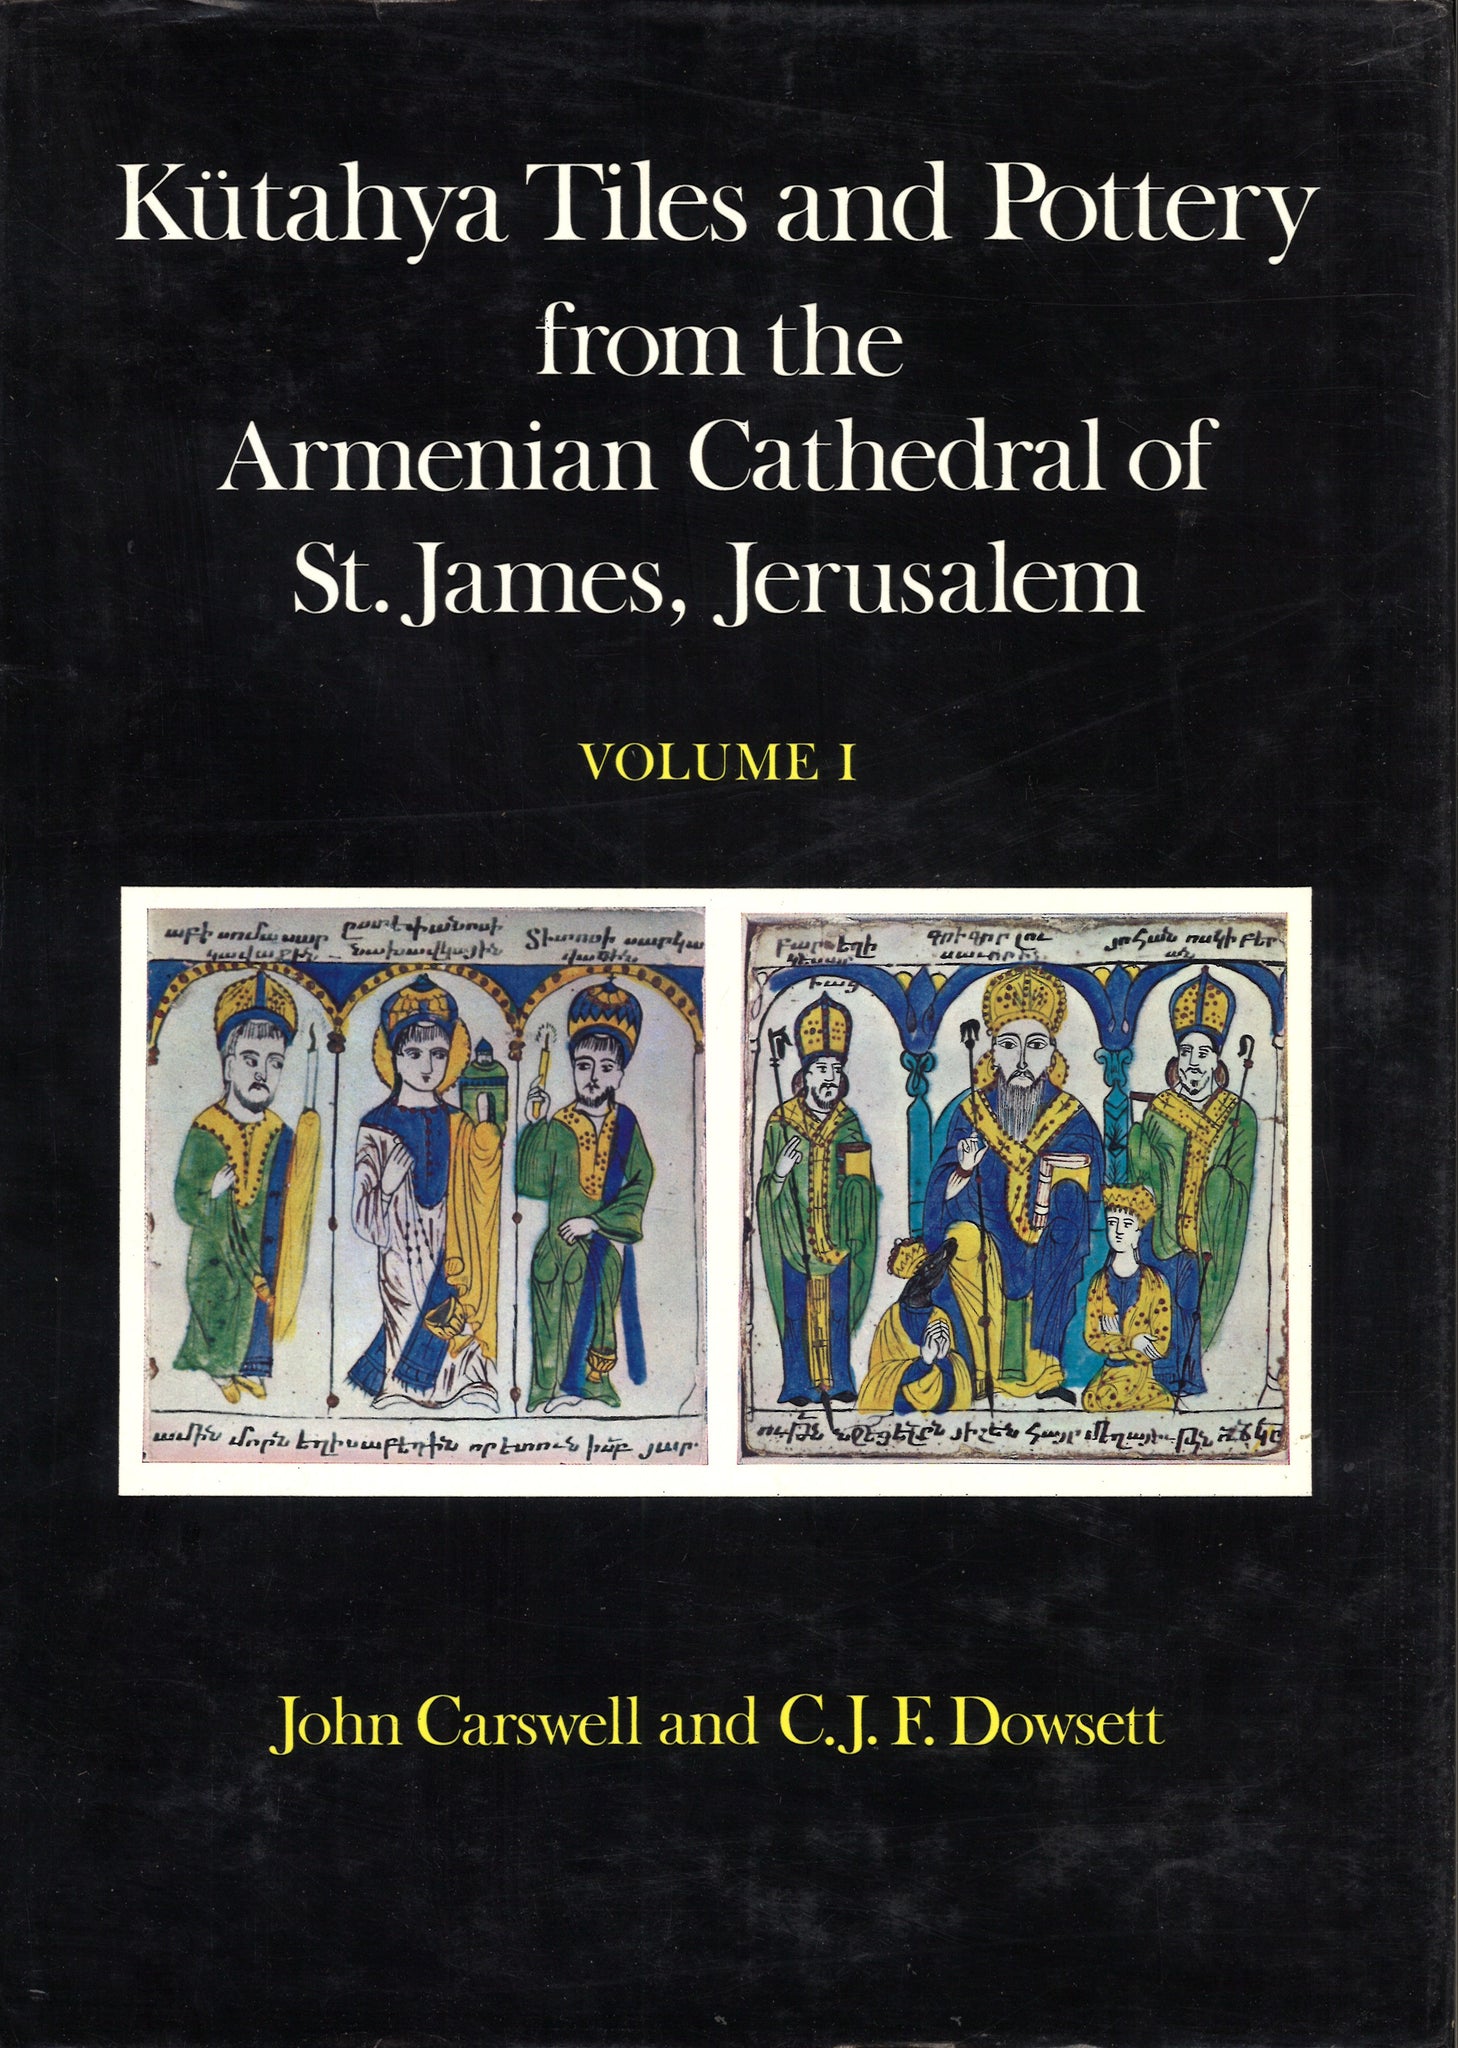 Kutahya Tiles and Pottery from the Armenian Cathedral of St. James, Jerusalem (2 Volumes)